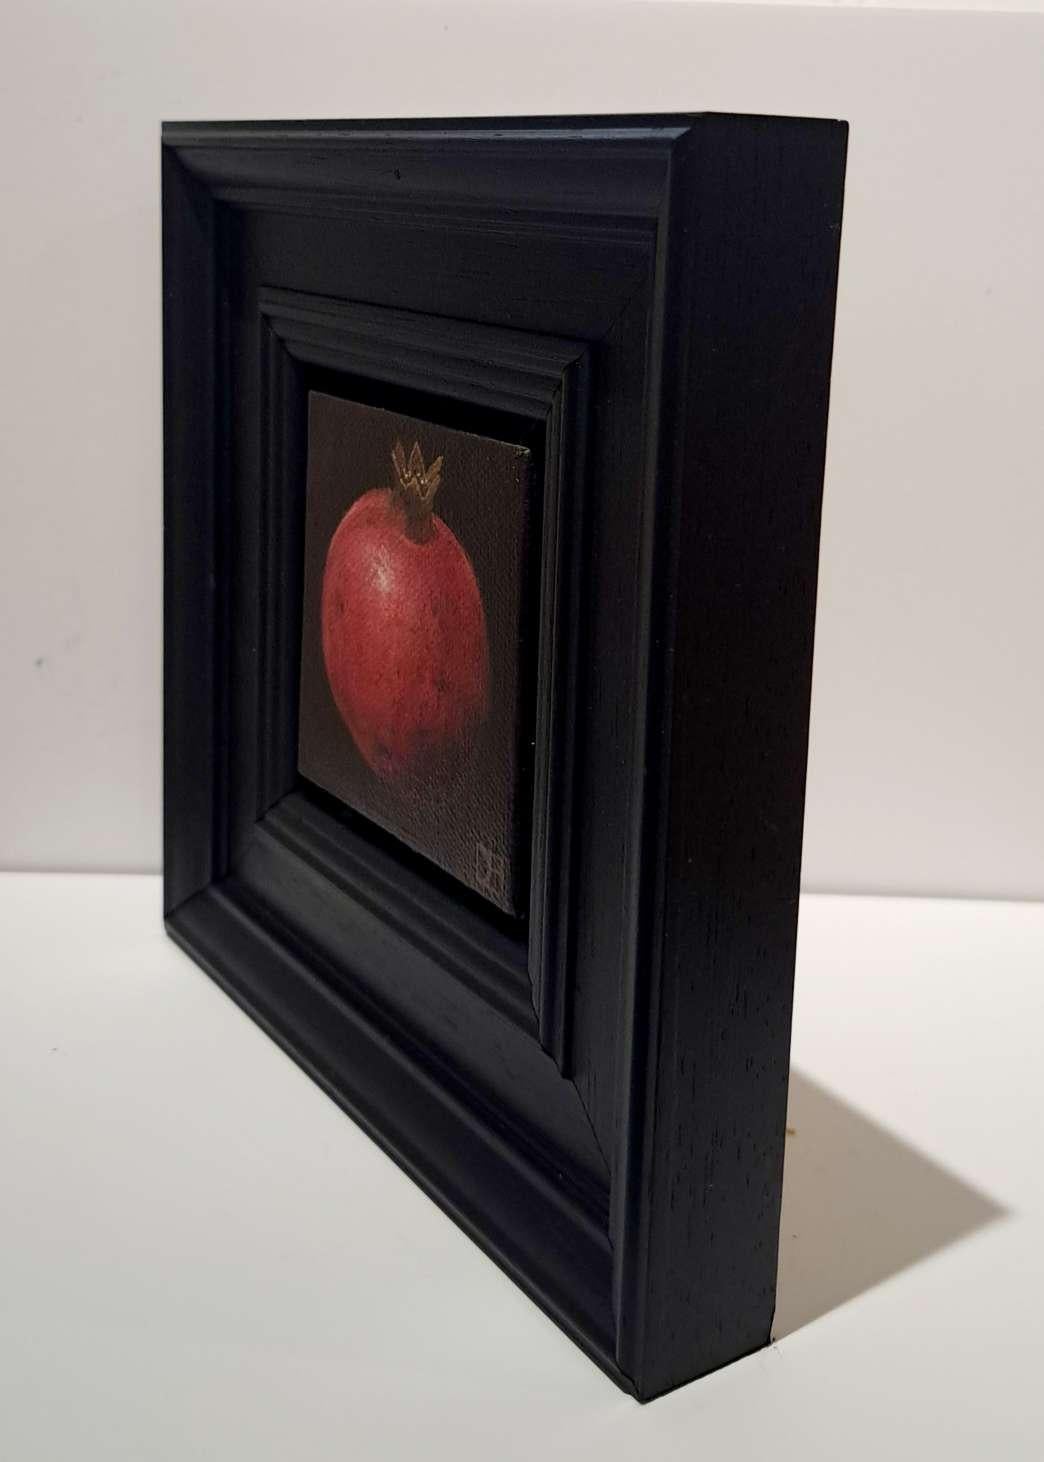 Pocket Pinky Red Pomegranate, Baroque Still Life, fruit For Sale 4